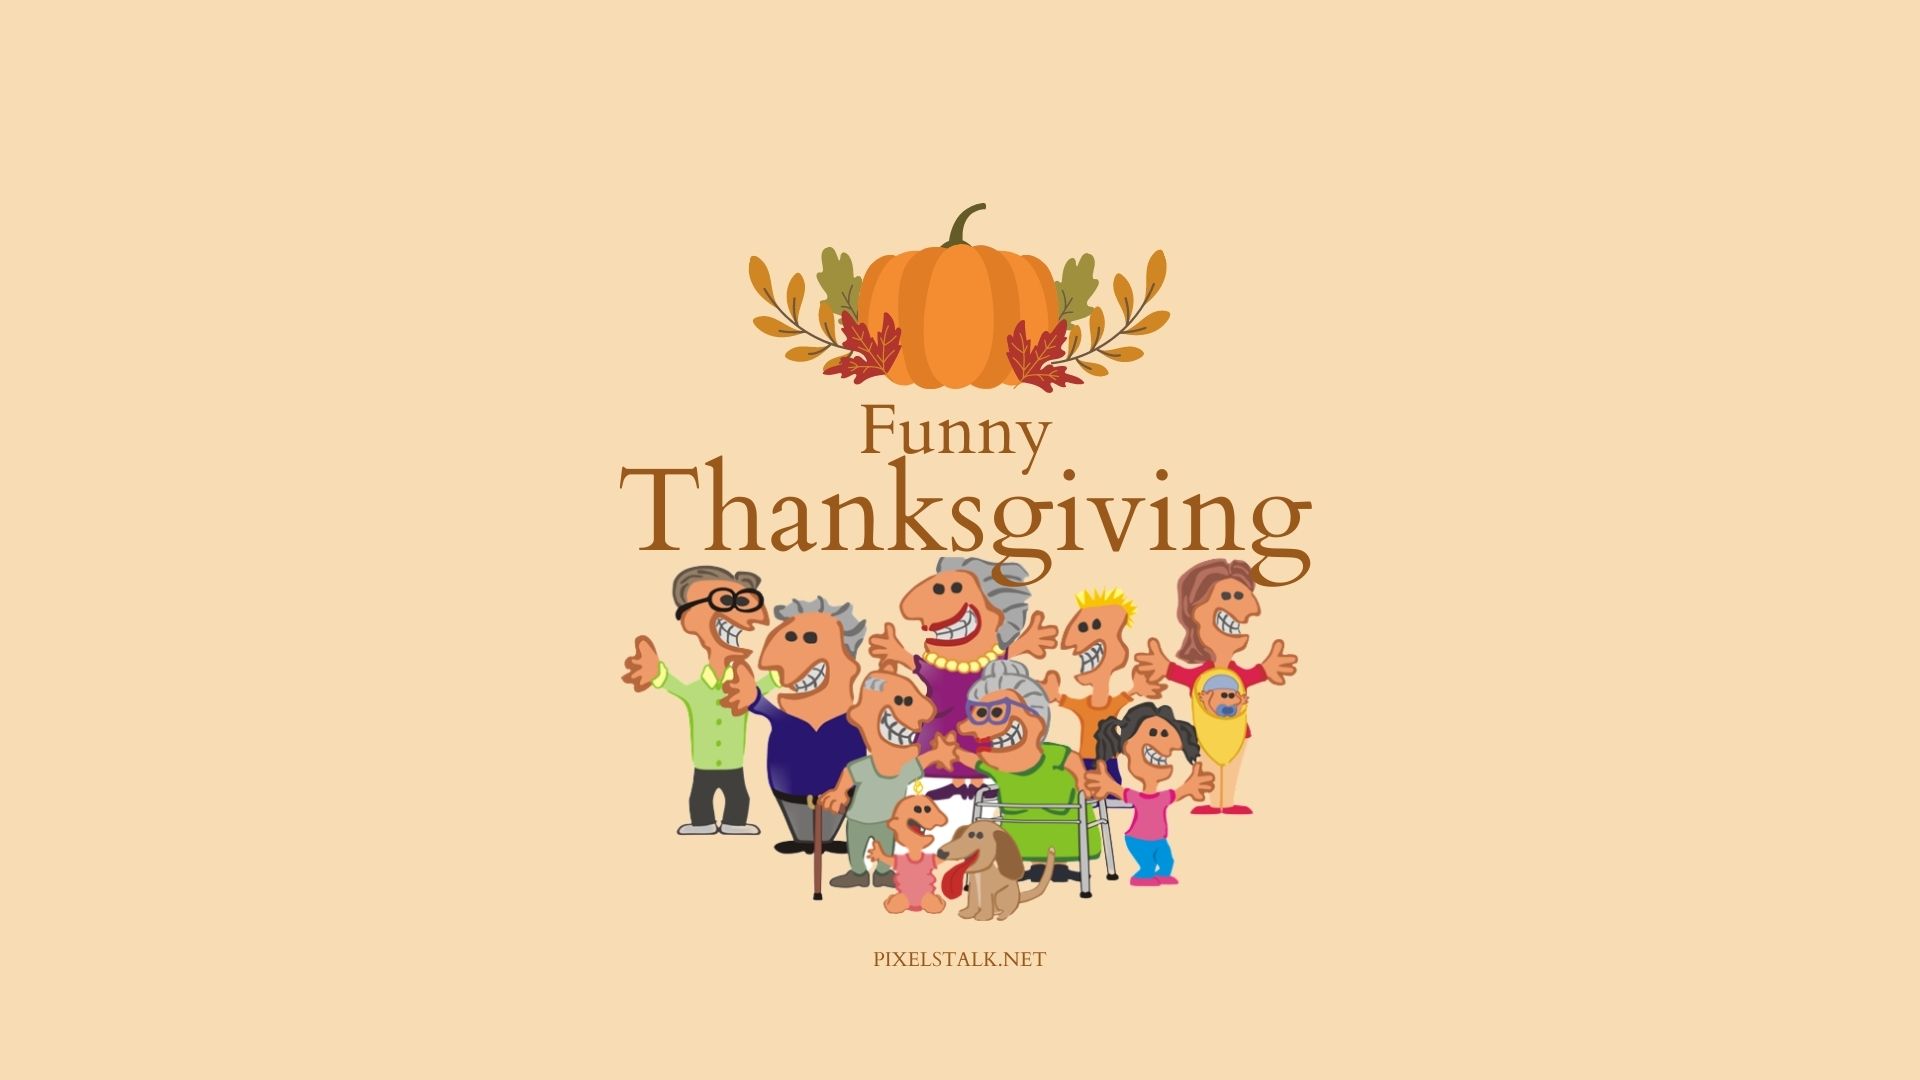 Funny Thanksgiving Wallpapers Free Download 